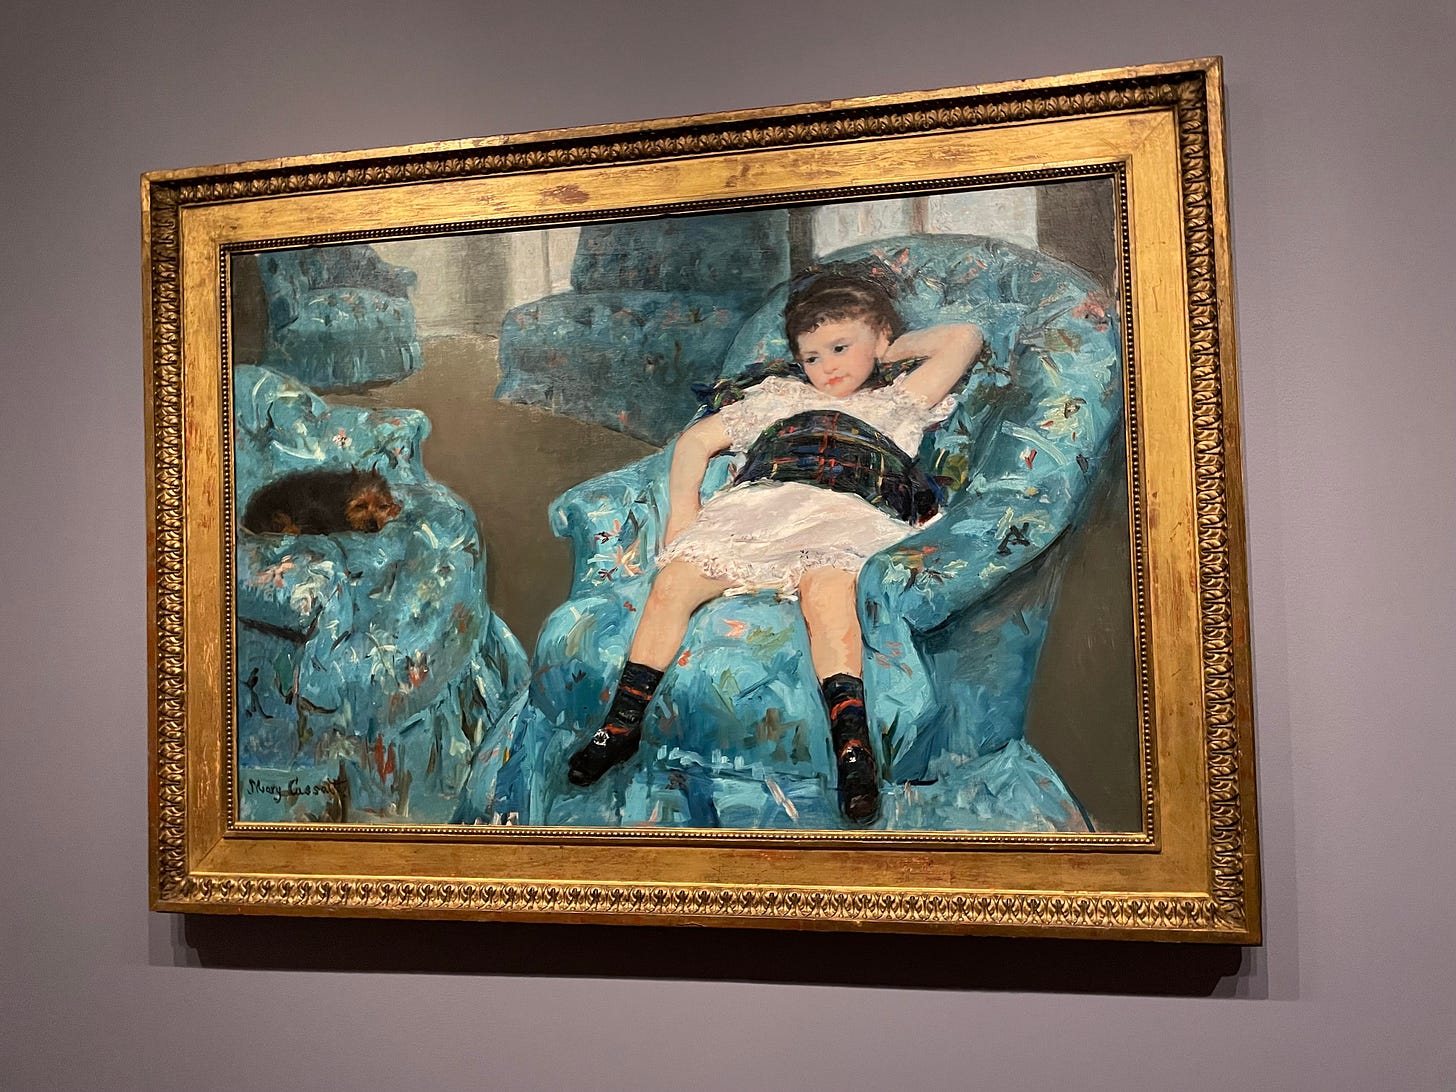 Photograph of Mary Cassatt's painting "Little Girl in a Blue Armchair" depicting a young girl slouching in a blue patterned armchair with an exhausted expression. She is wearing a plaid dress and plaid socks. She has brown hair. A brown dog is resting on an adjacent armchair. 